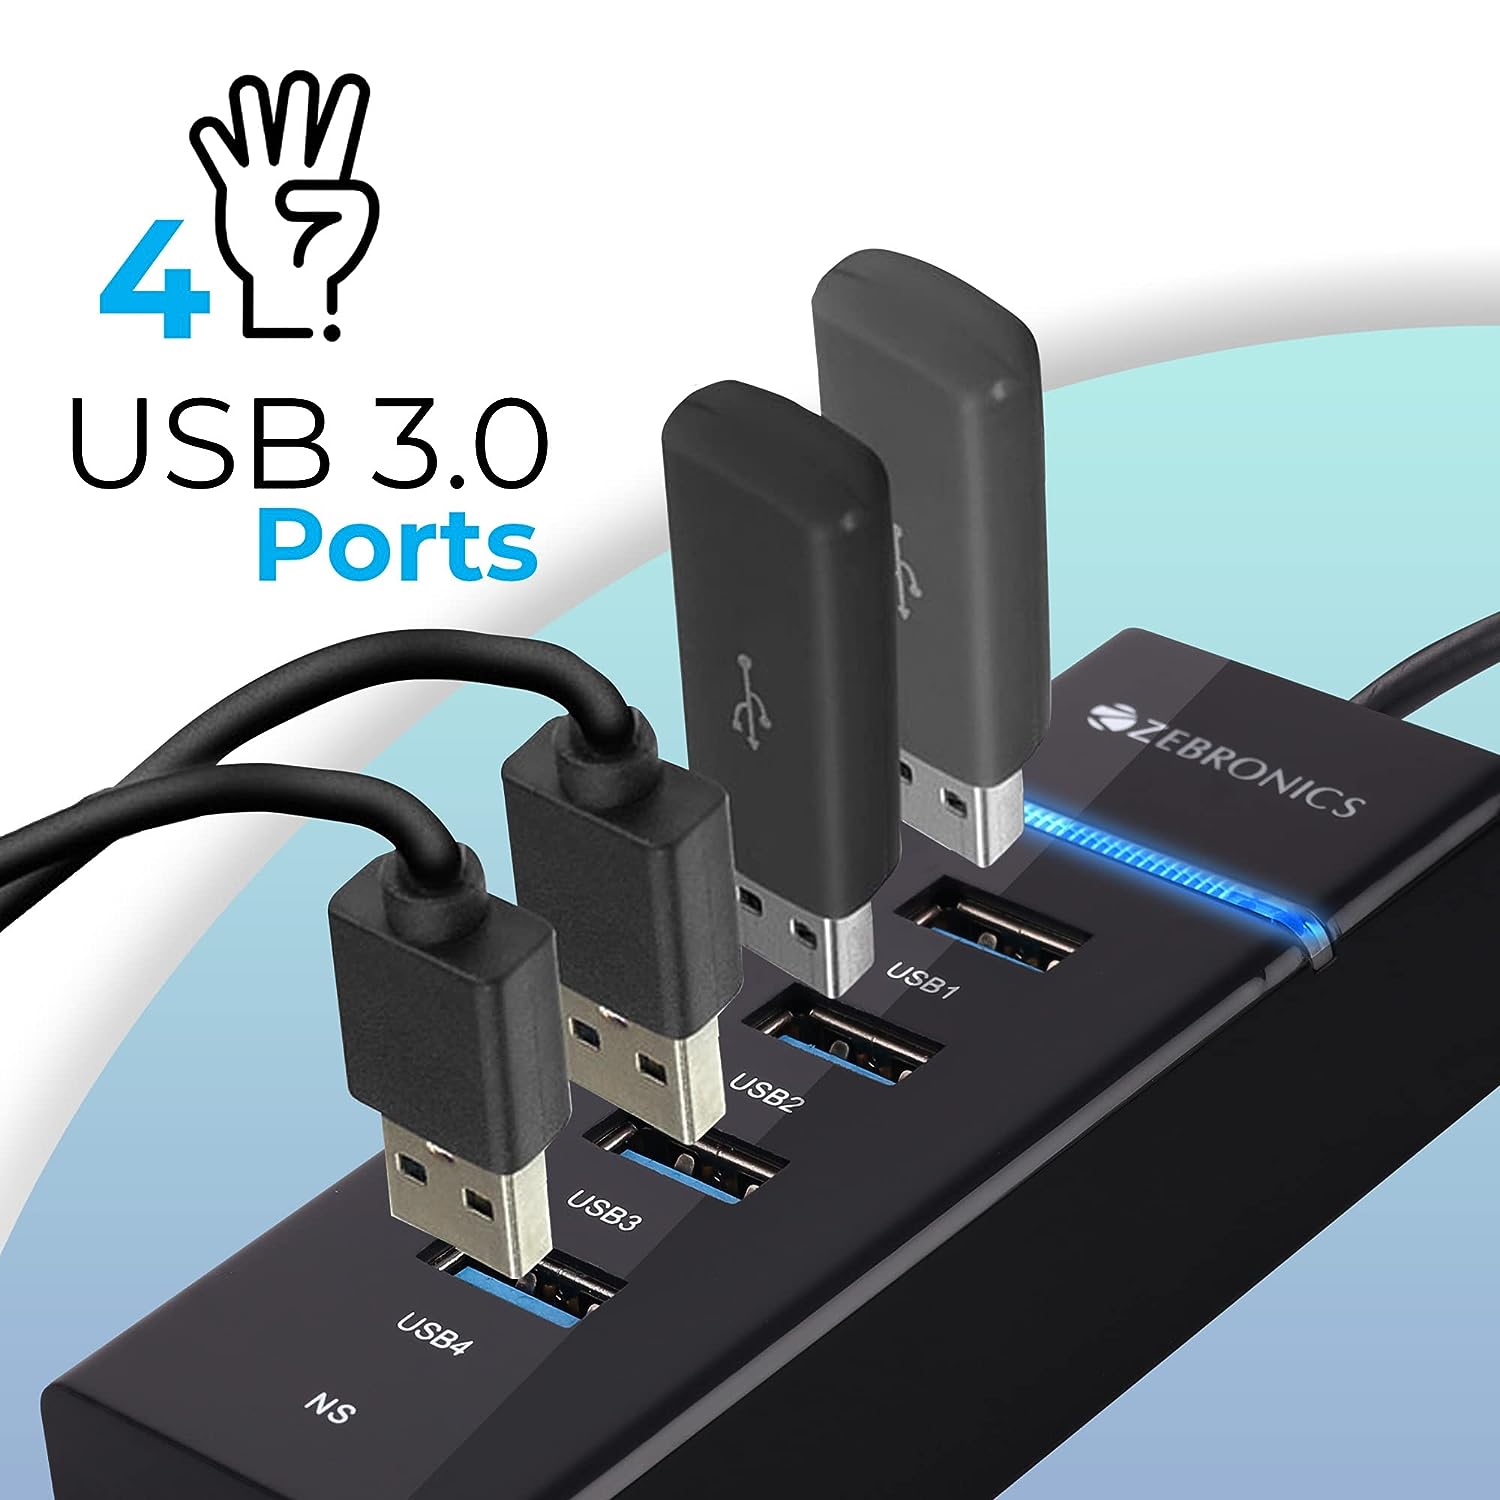 Zebronics 300HB 4 Port USB 3.0 Hub with Hi-Speed Data Transfer, LED Indication, 15cm Cable, Backward Compatible, Multi Device Connection, Plug Play Usage, Glossy Finish and Lightweight Design